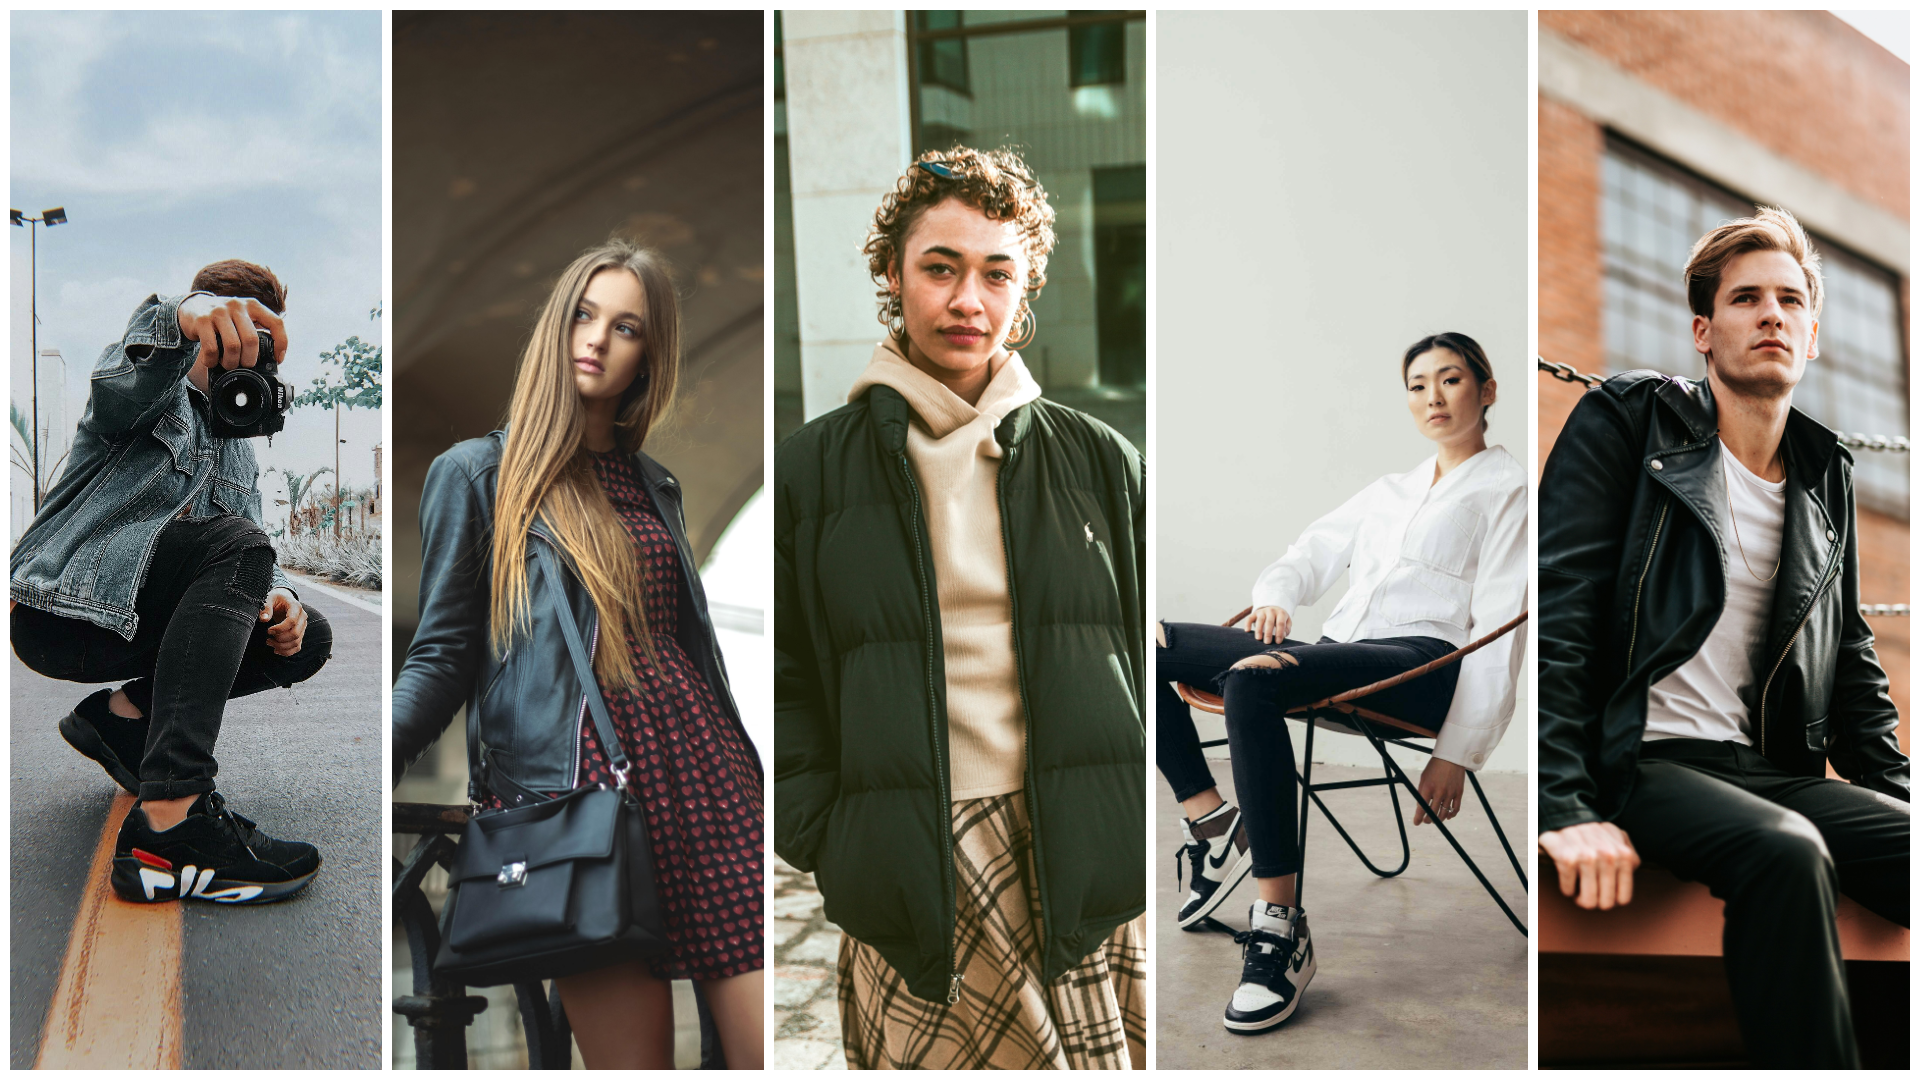 Five images of Berliners, wearing fashionable clothes. First, a man wearing dark cuffed skinny jeans, a light denim jacket, hoodie, and bold athletic shoes. Second, a woman wearing a short (pleated) checkered dress, denim jacket, and carrying a black leather handbag. Third, a tan woman with short hair wearing a pale hoodie, black puffer jacket, tan and black plaid skirt. Fourth, an Asian woman wearing a flowy white blouse, skinny denim ankle jeans, and high top leather athletic shoes. Lastly, a man with blonde hair wearing a leather jacket, white t-shirt, and denim.